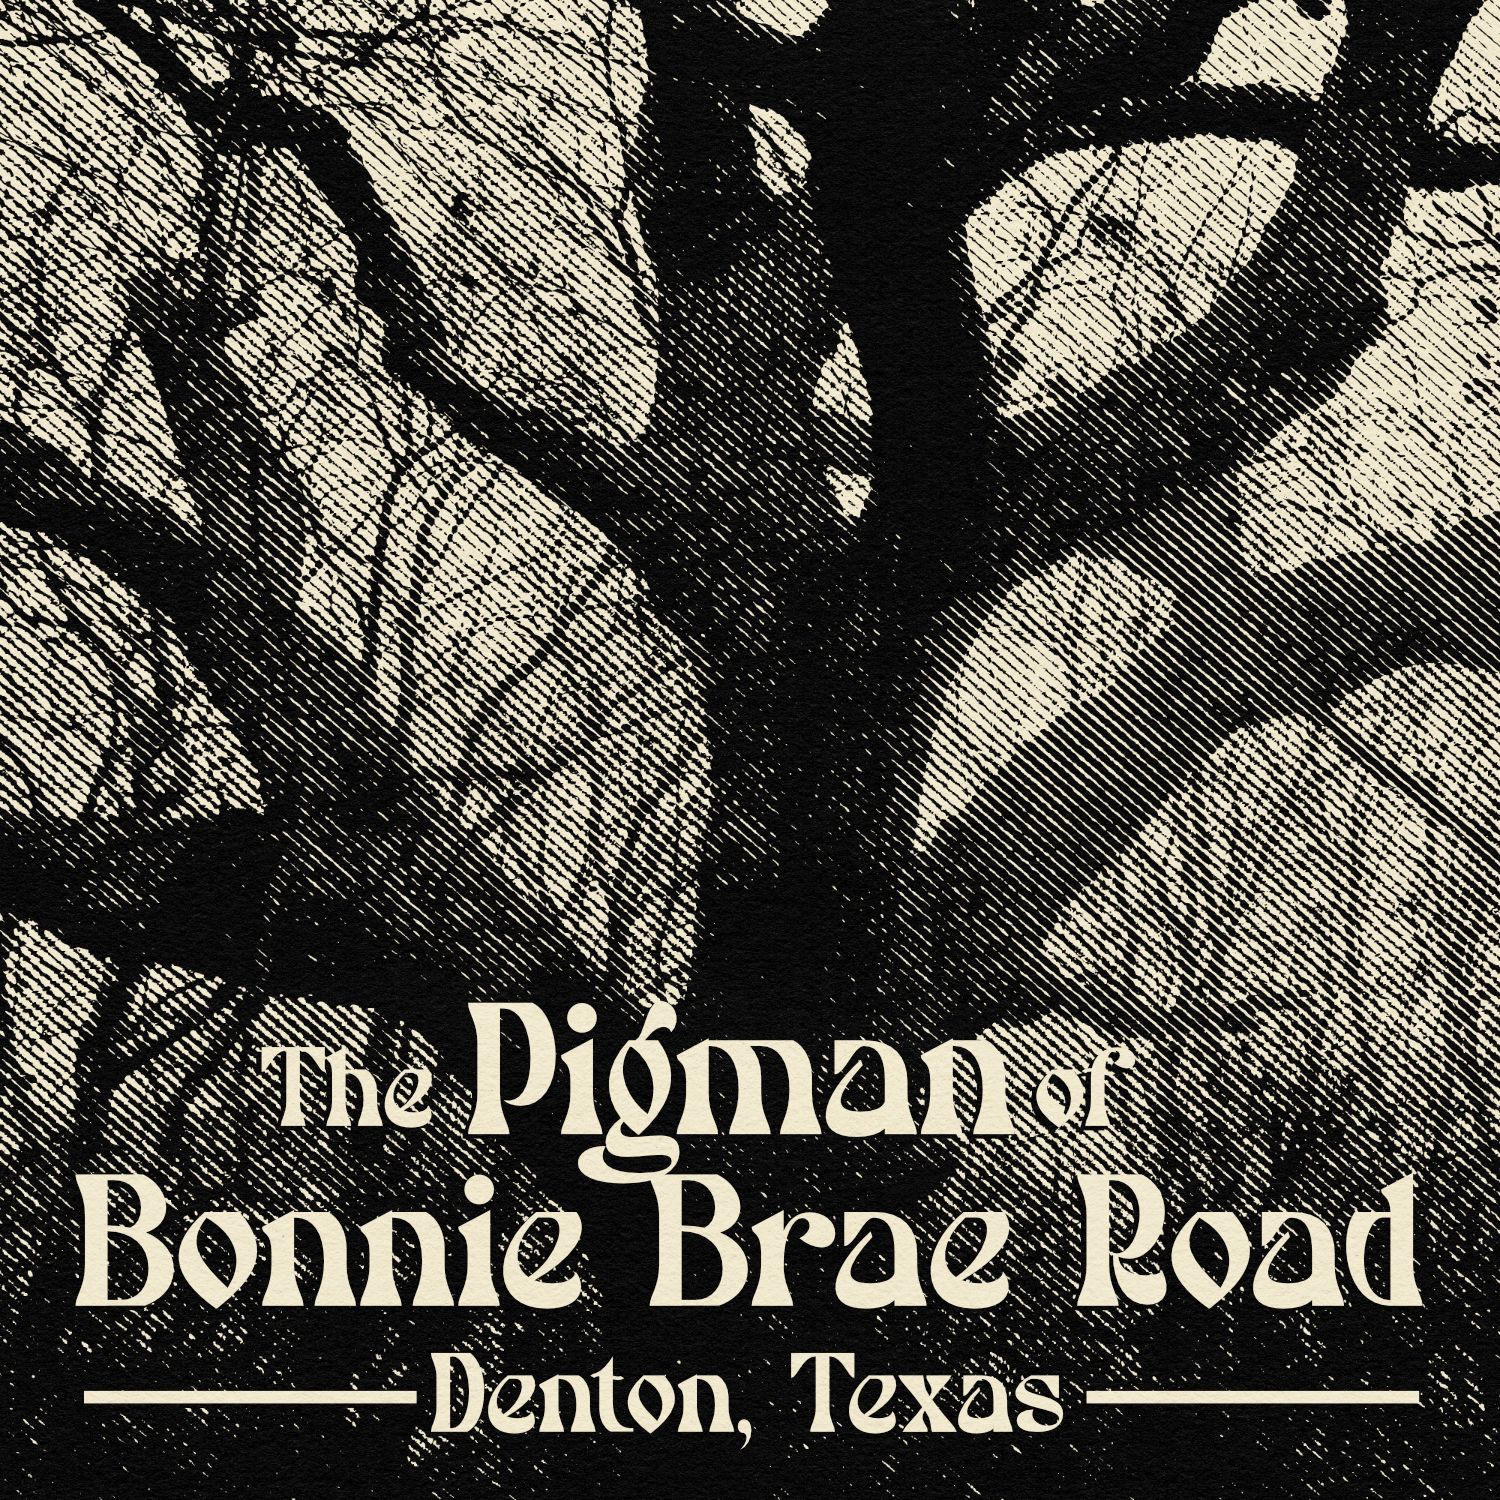 a halftone photo of a gnarled tree with the words The Pigman of Bonnie Brae Road, Denton, Texas